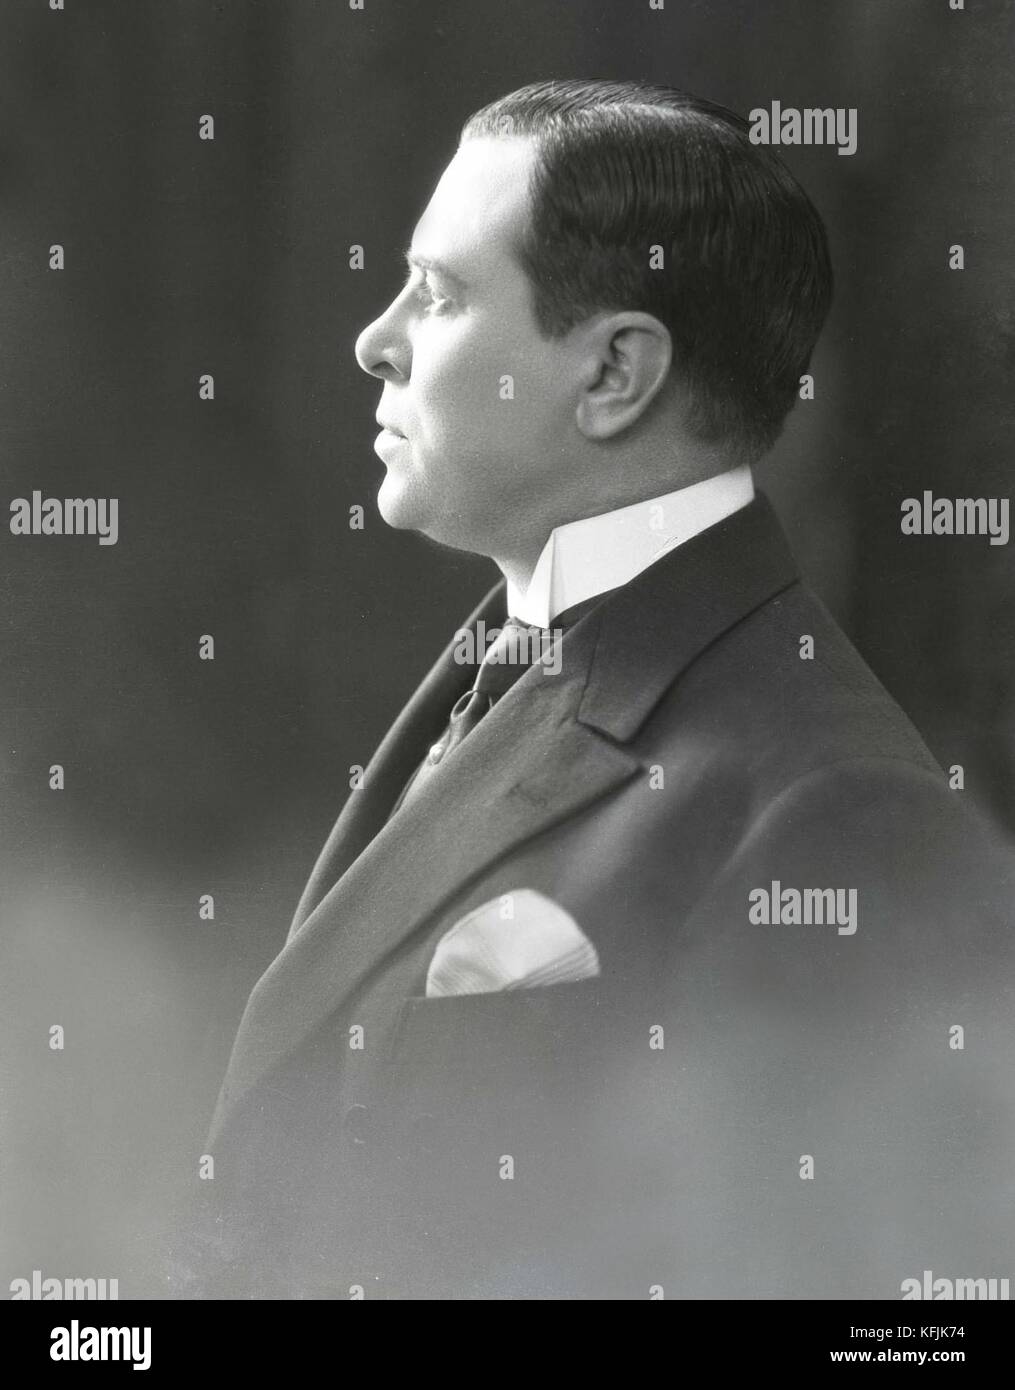 Joseph Marie François Spoturno, known as François Coty (1874-1934), French industrial and perfumer.  c.1910    Photo Taponier credit:Photo12/Coll. Taponier Stock Photo